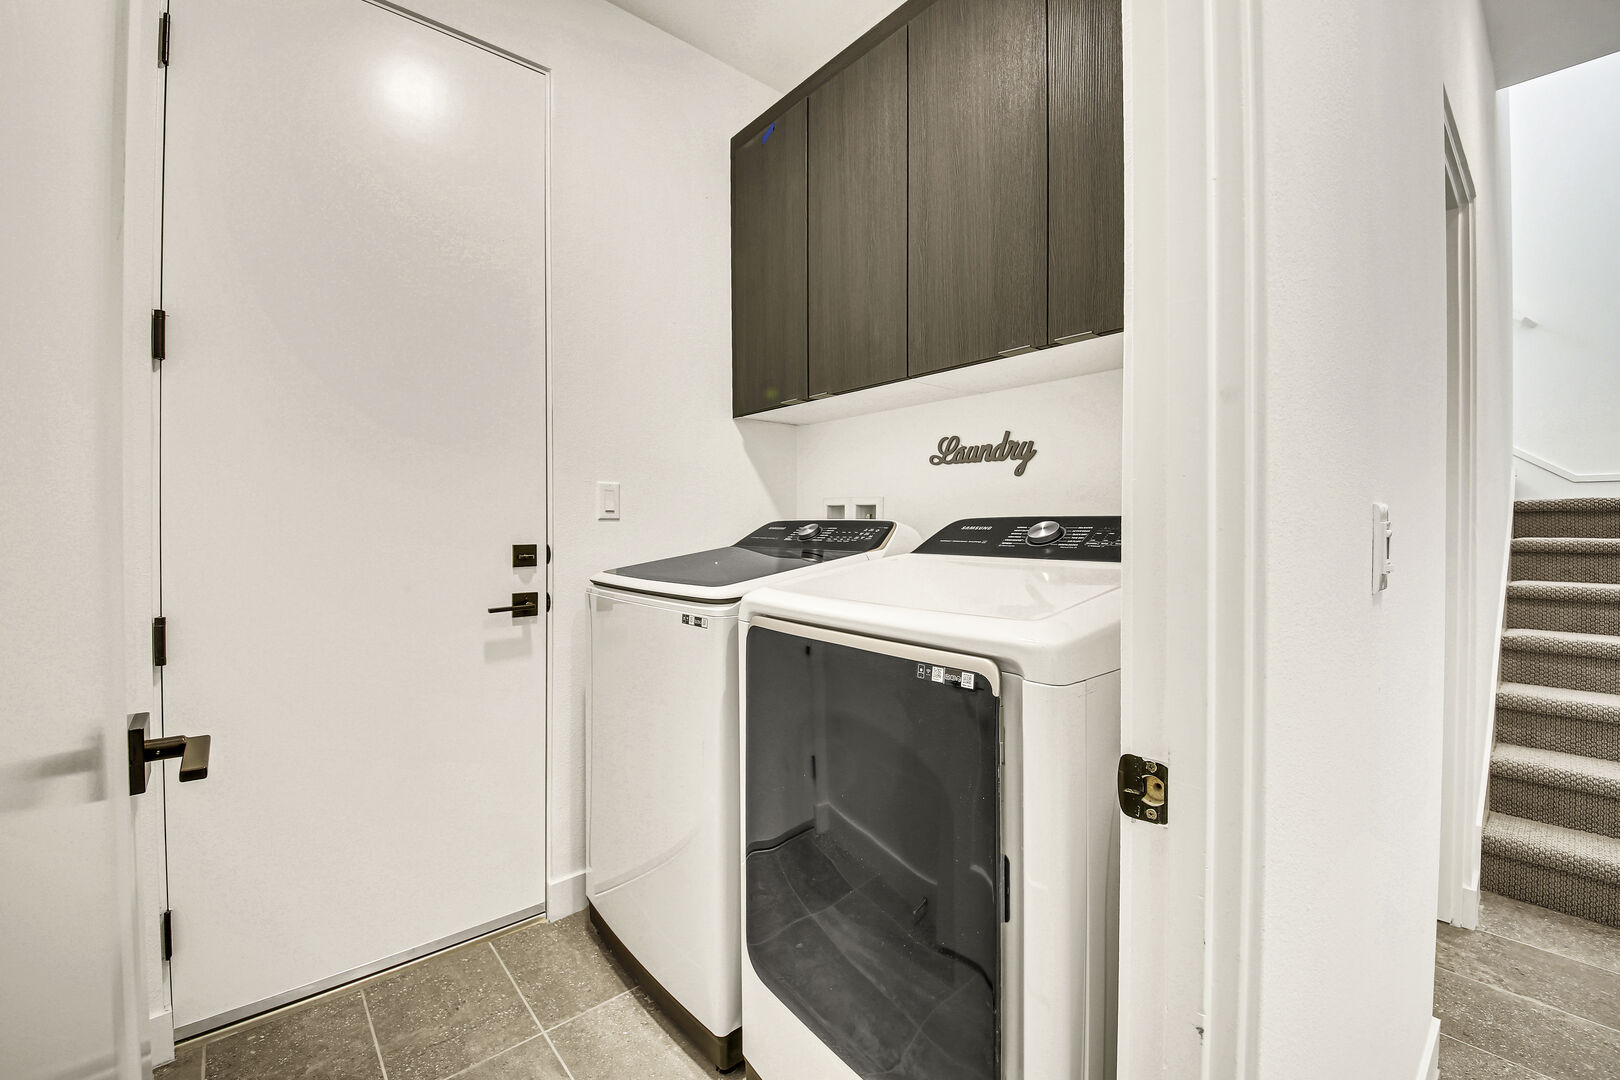 The laundry room is equipped with a washer and dryer so that you may go back home with clean clothes.